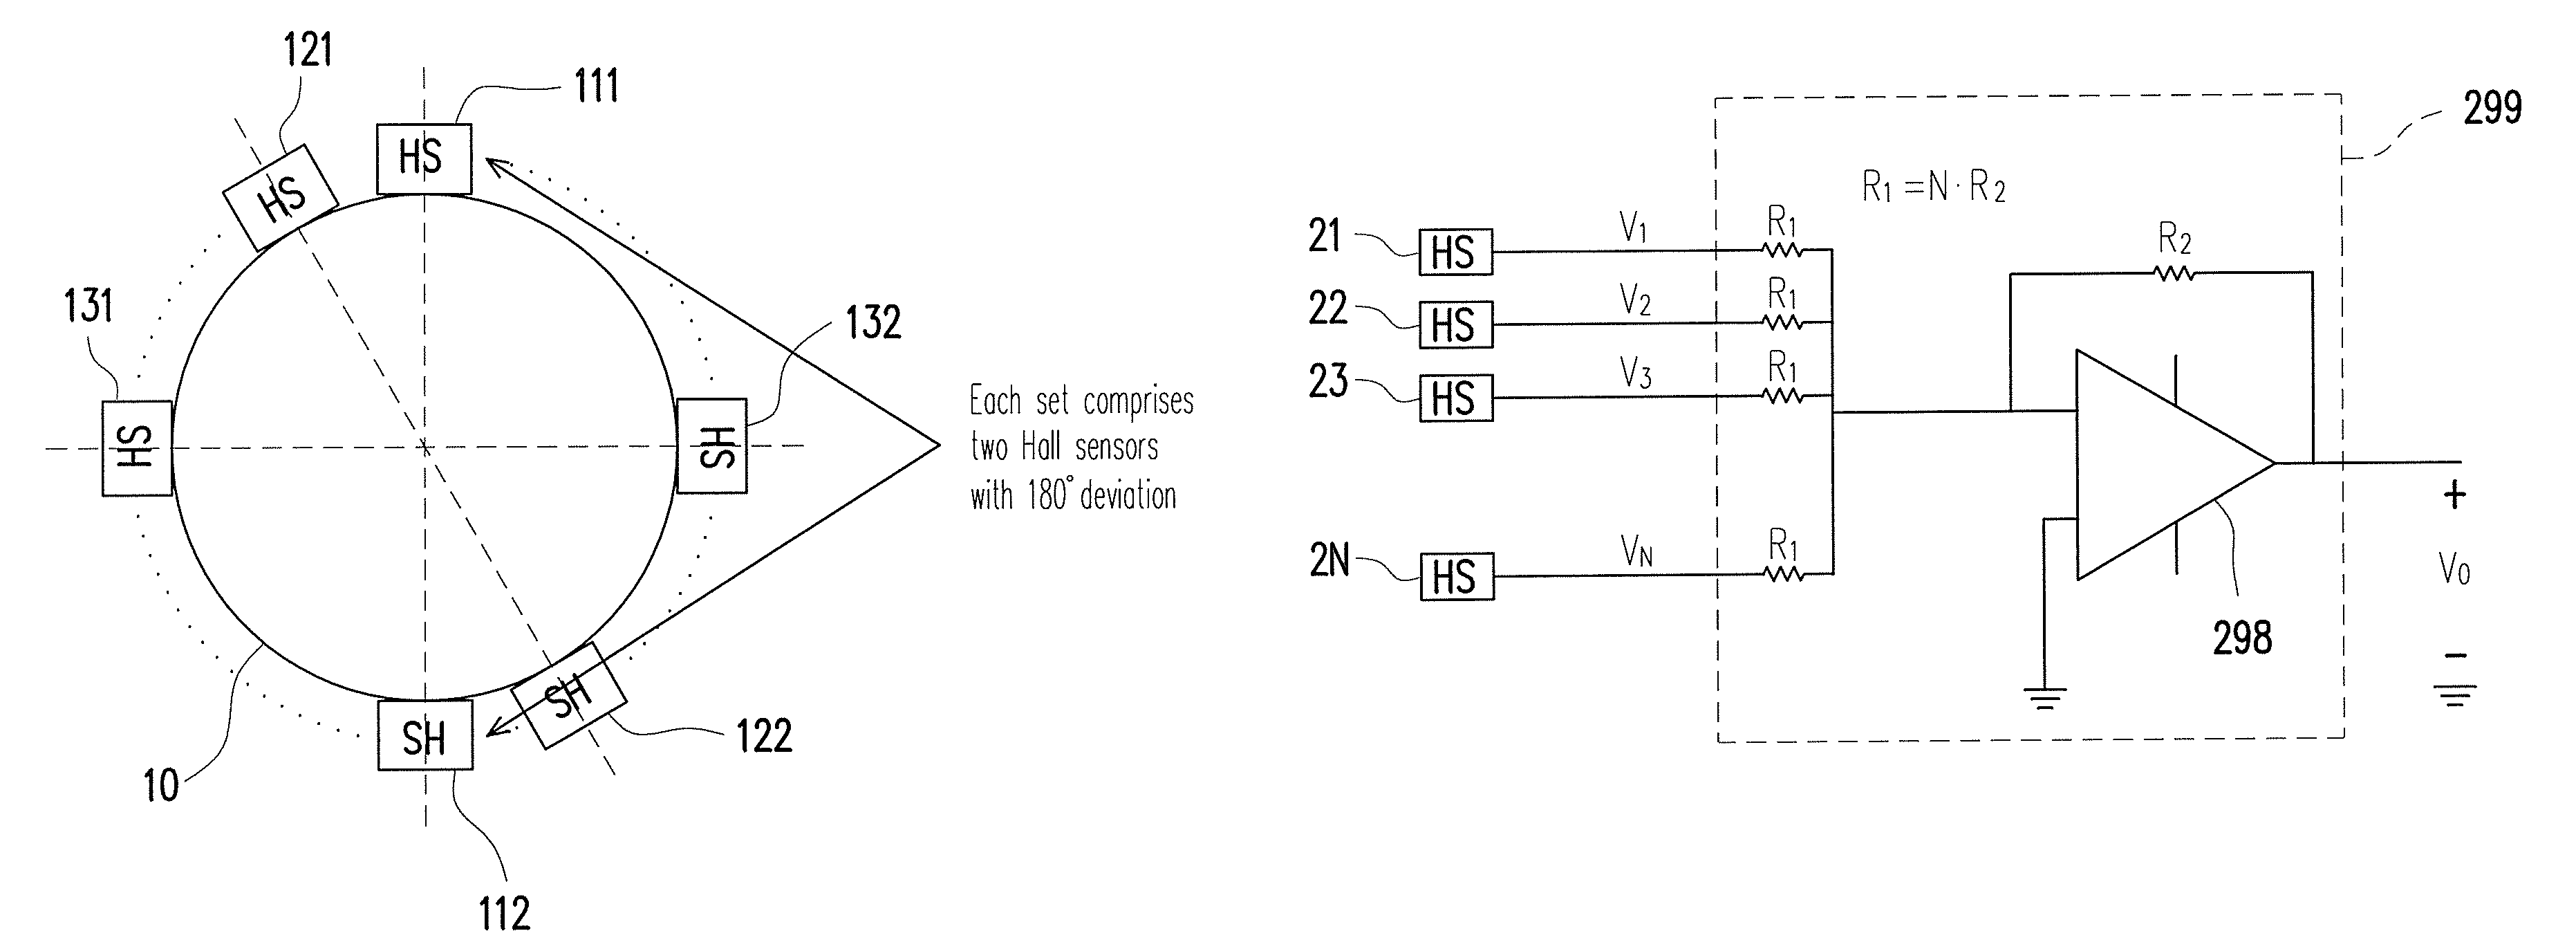 Method and apparatus for current measurement using hall sensors without iron cores